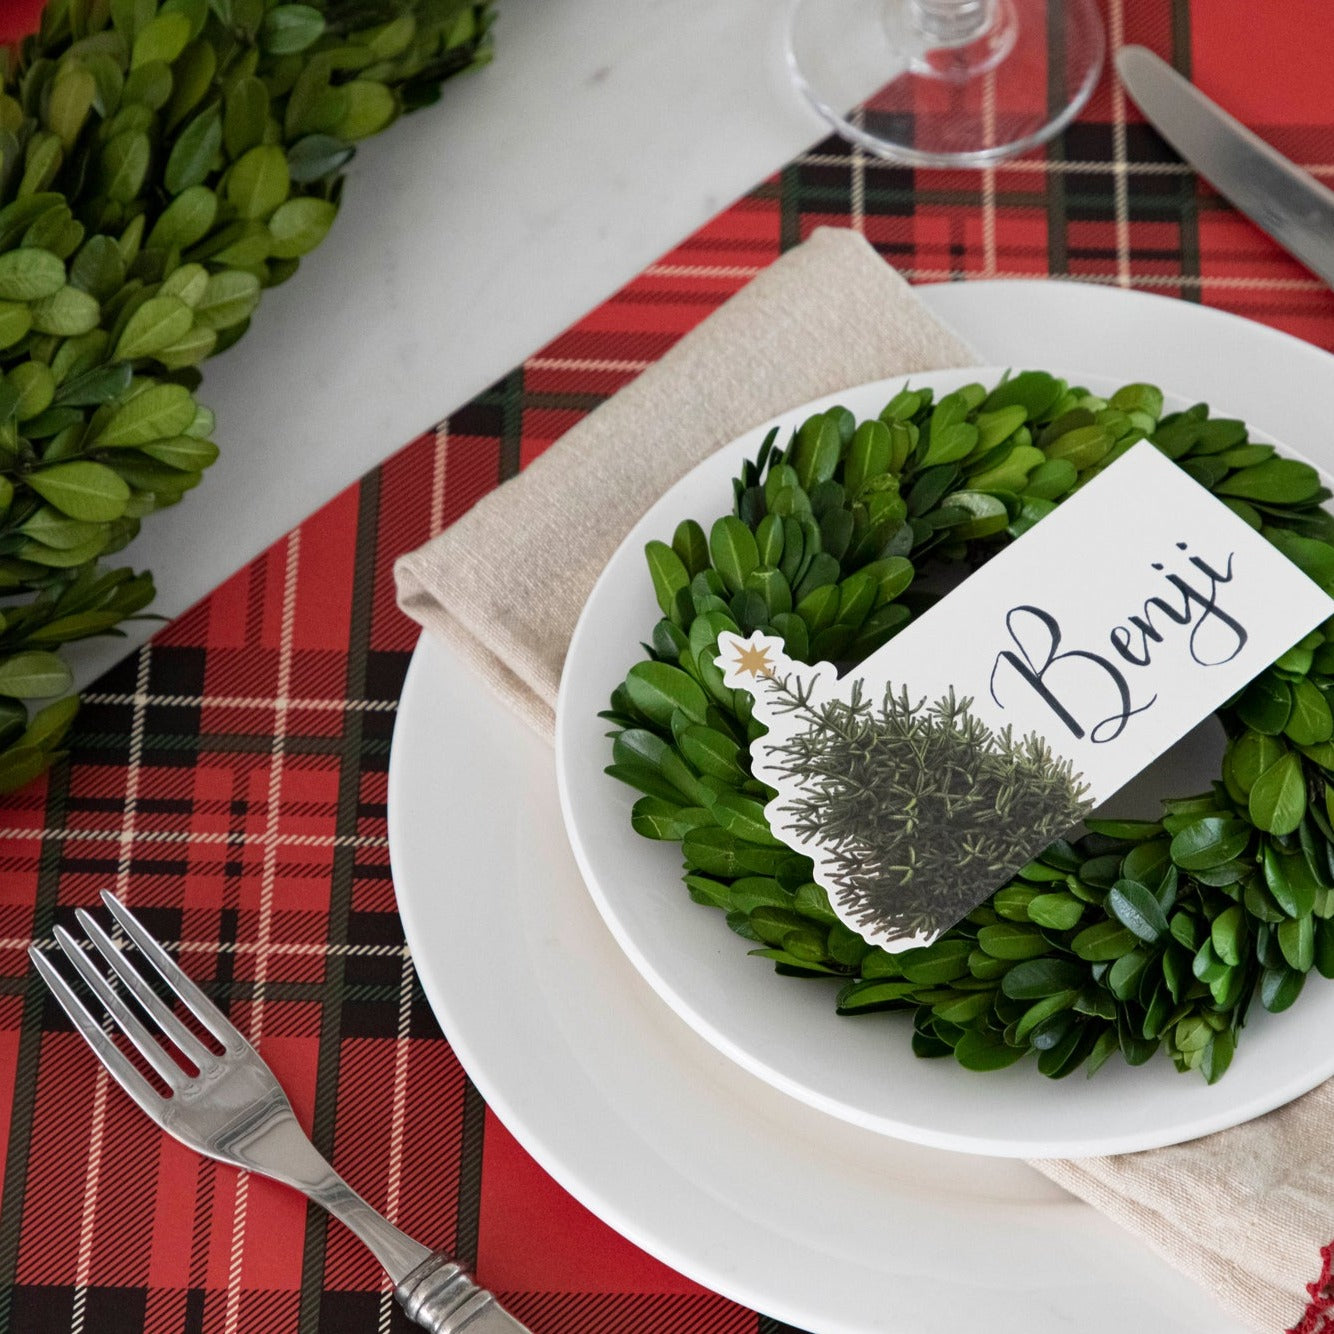 Close-up of the Red Plaid Placemat under a festive holiday-themed place setting.